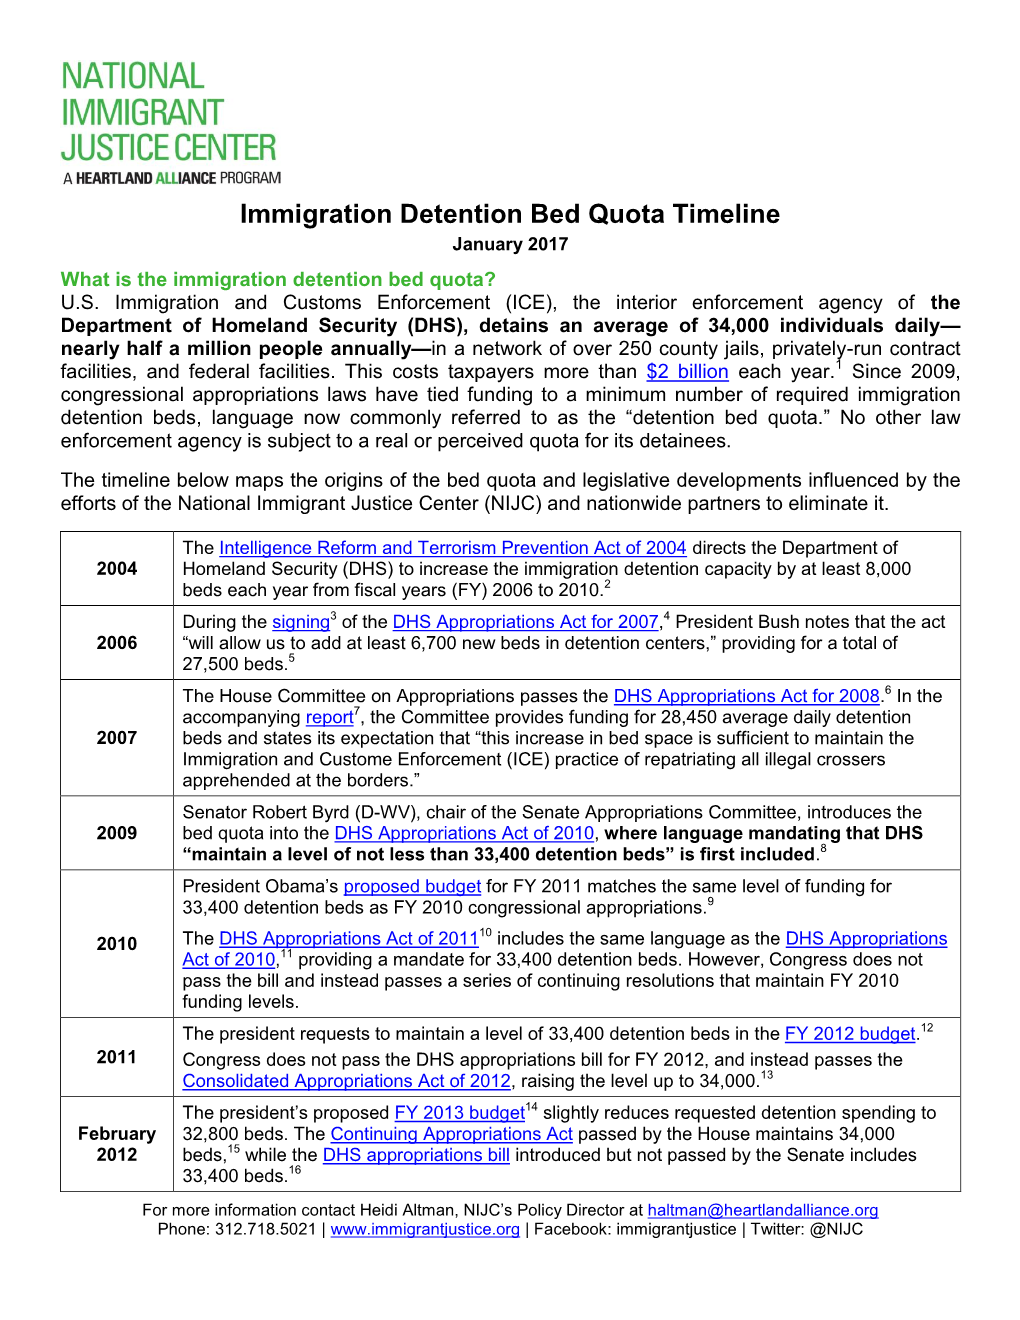 Immigration Detention Bed Quota Timeline January 2017 What Is the Immigration Detention Bed Quota? U.S